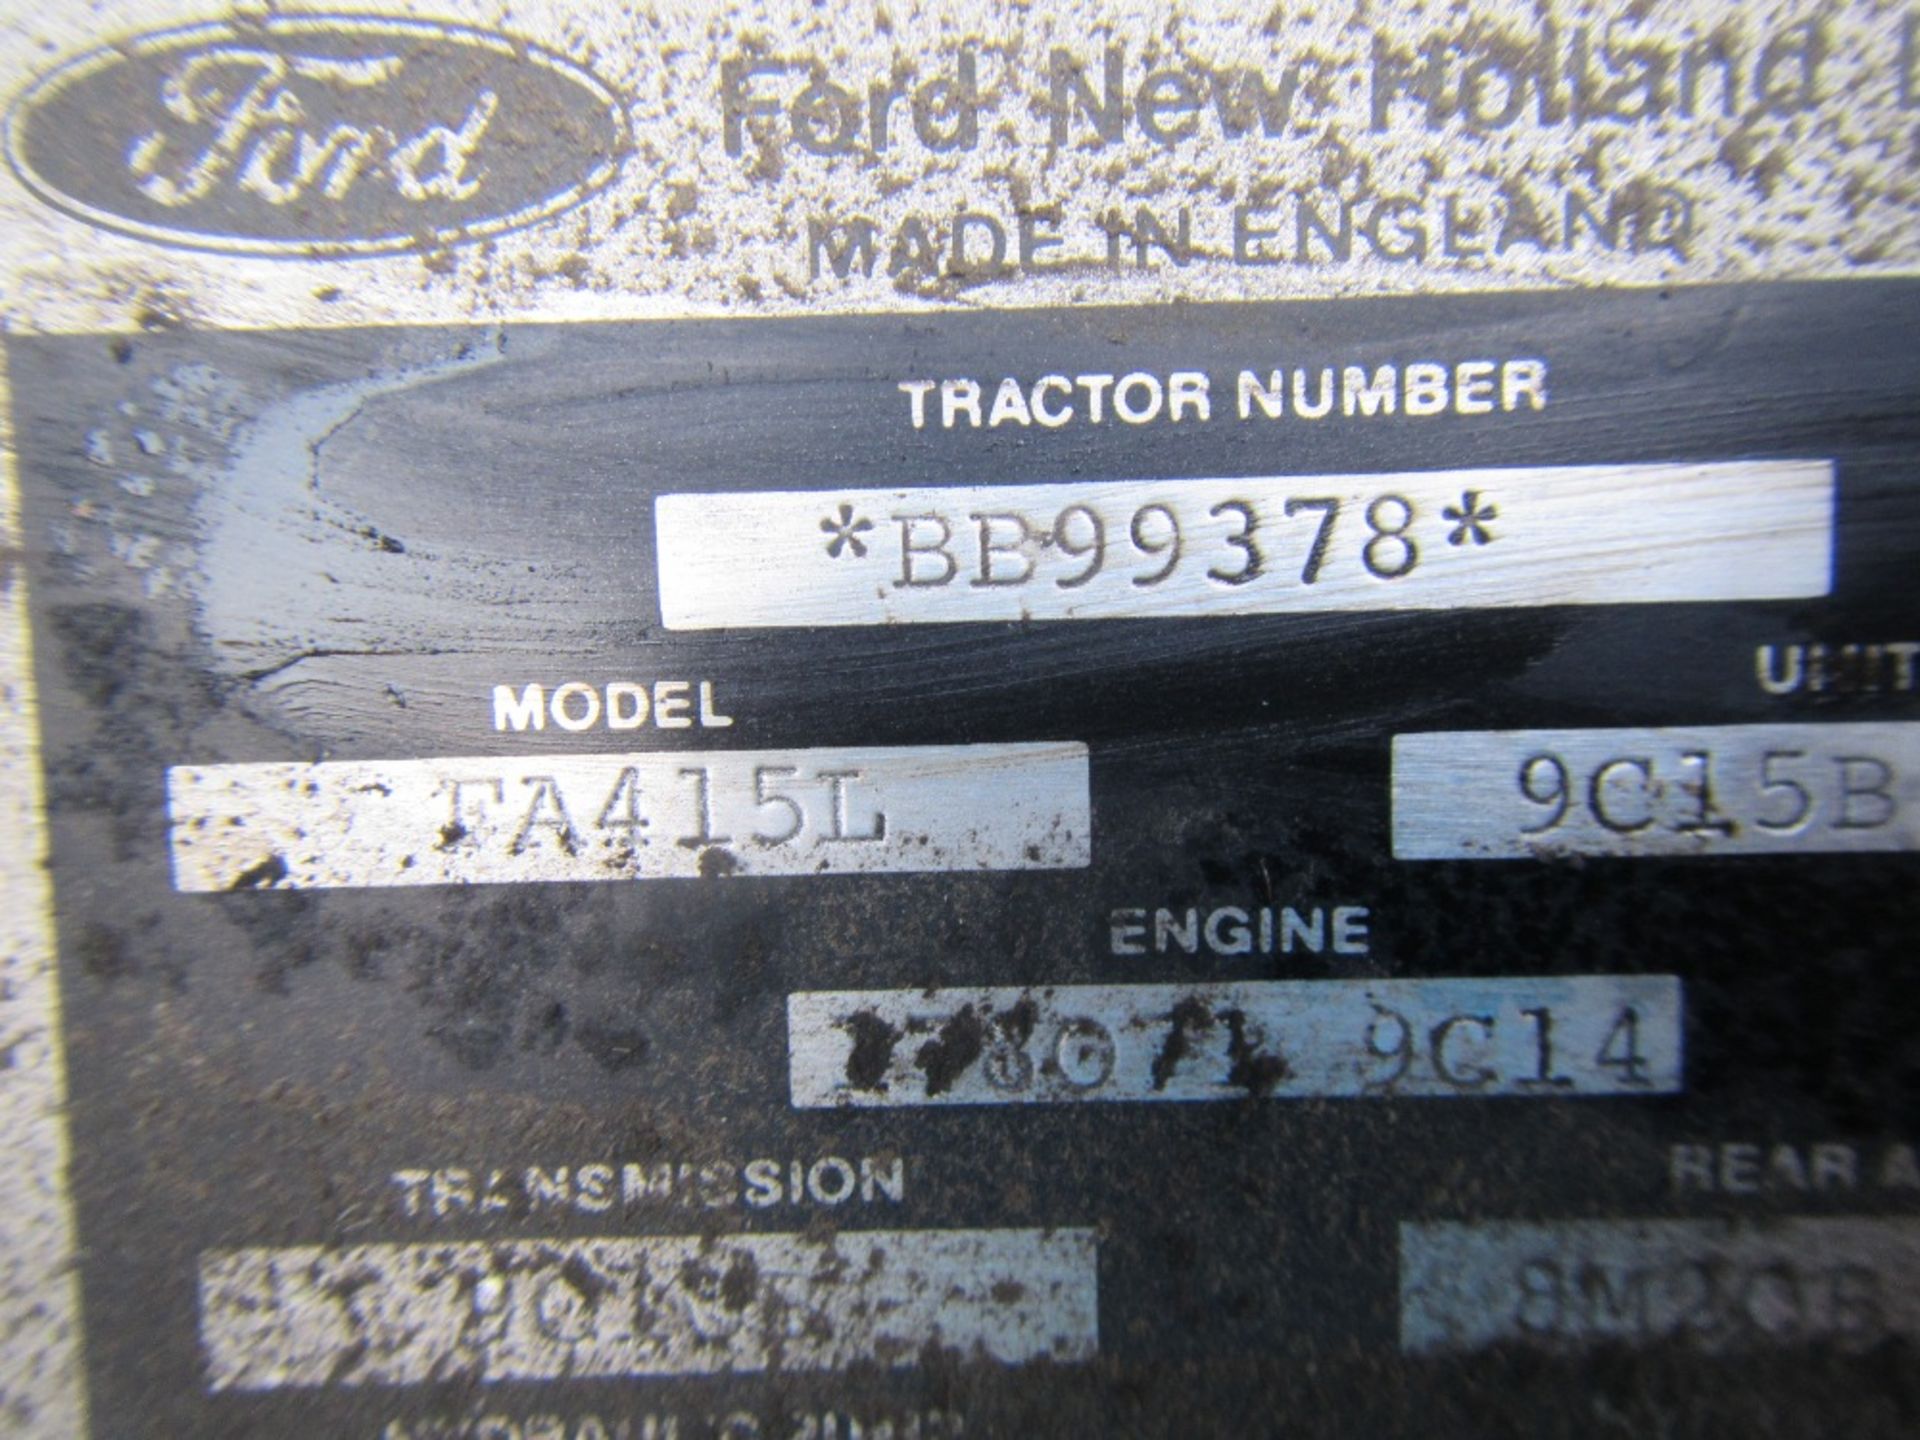 Ford 7610 4wd Tractor. Front Weights, 16.9x38 Tyres Reg No F189 OBW Ser No BB99378 - Image 18 of 18